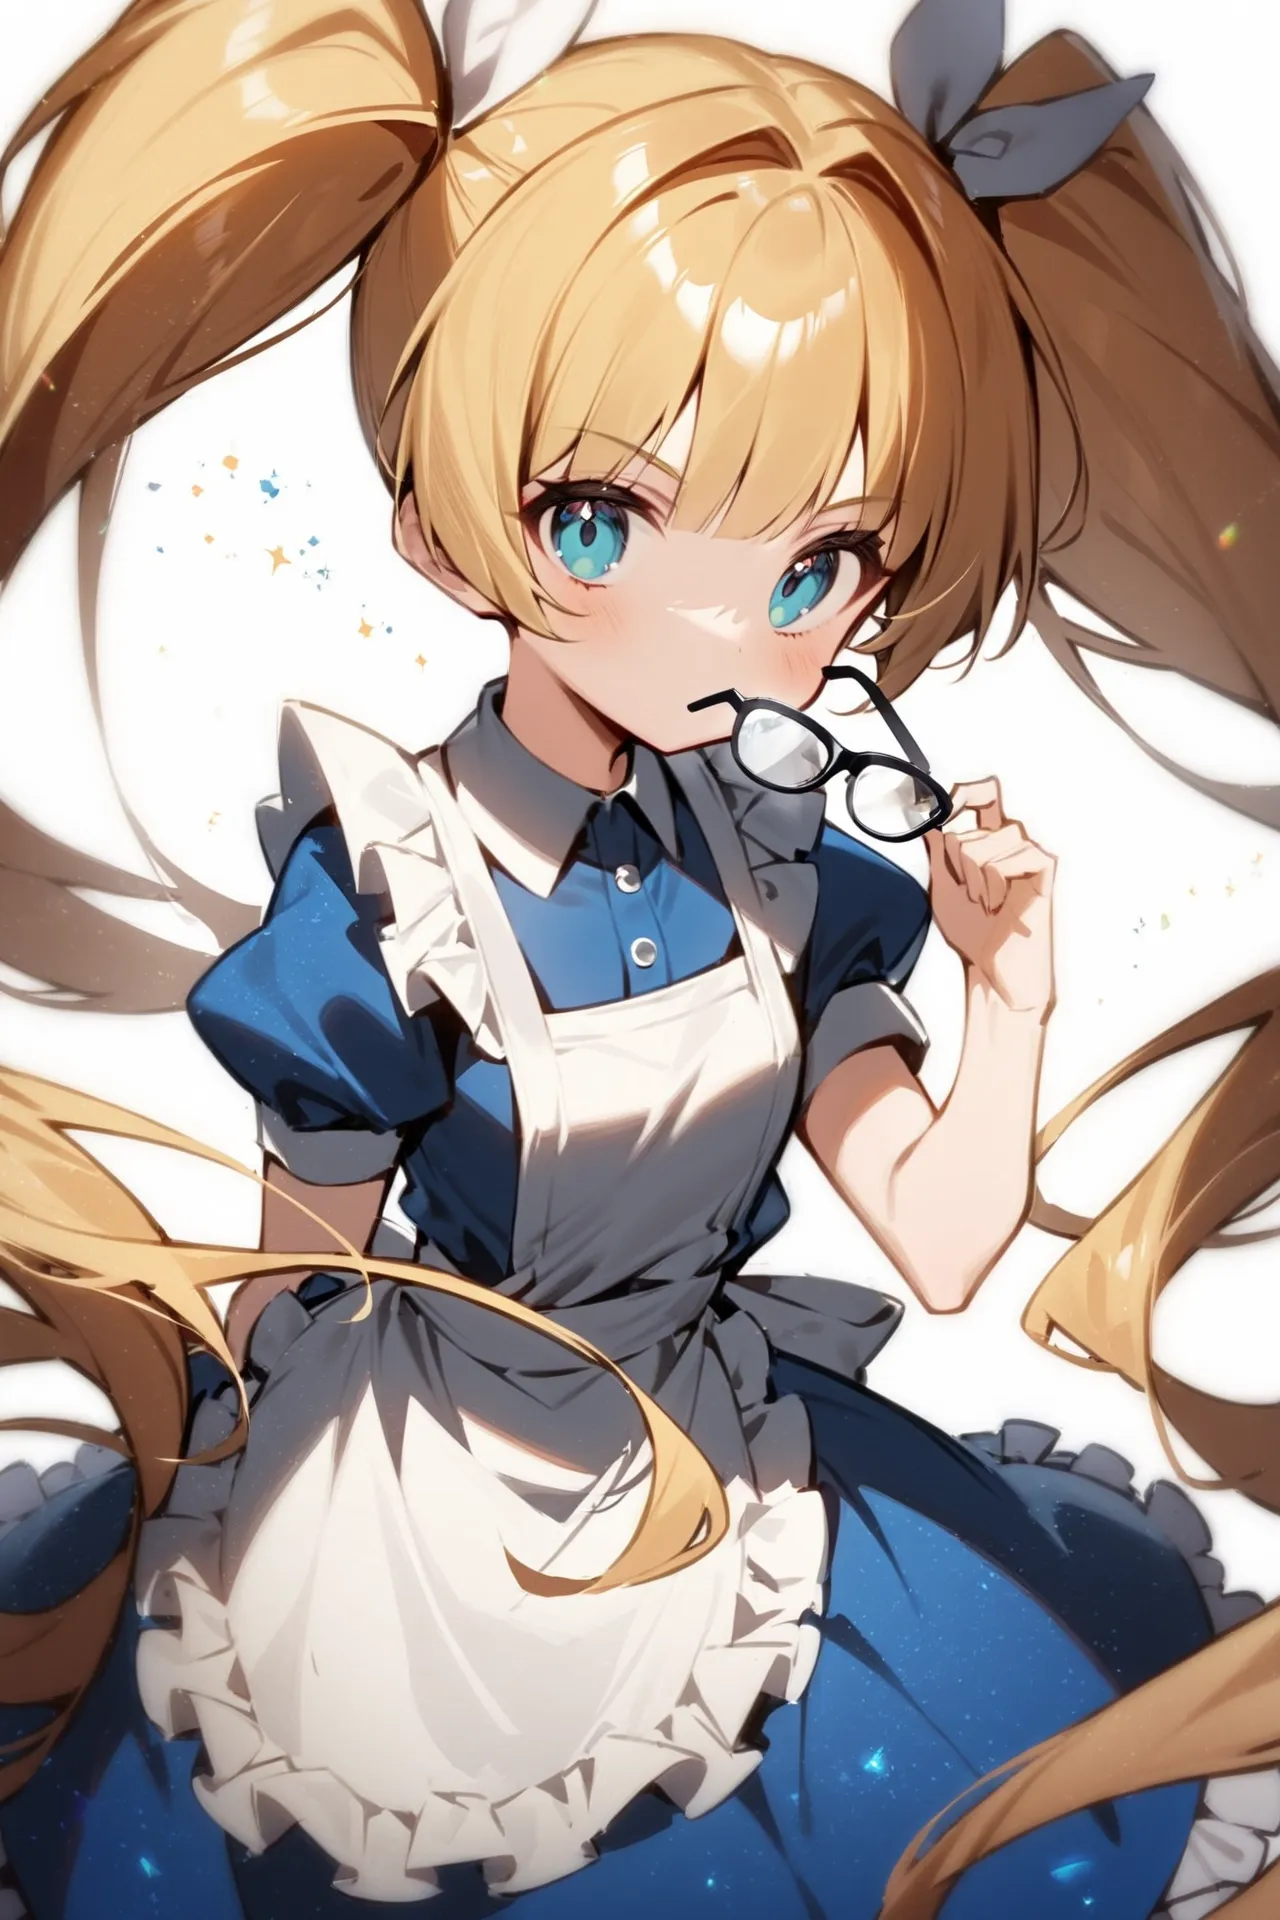 '1girl, holding eyewear,\nblonde hair, twintails, blue dress, white apron,\nwhite background,\nAlice in glitterworld\nNegative prompt: (worst quality, low quality:1.4), nsfw\nSteps: 35, Sampler: DPM++ 2M SDE Karras, CFG scale: 7, Seed: 1, Size: 640x960, Model hash: 642b08ca49, Model: ConfusionXL2.0_fp16_vae, VAE hash: 63aeecb90f, VAE: sdxl_vae_0.9.safetensors, Denoising strength: 0.6, Clip skip: 2, Hires upscale: 2, Hires steps: 15, Hires upscaler: ESRGAN_4x, Eta: 0.68, Version: v1.7.0'